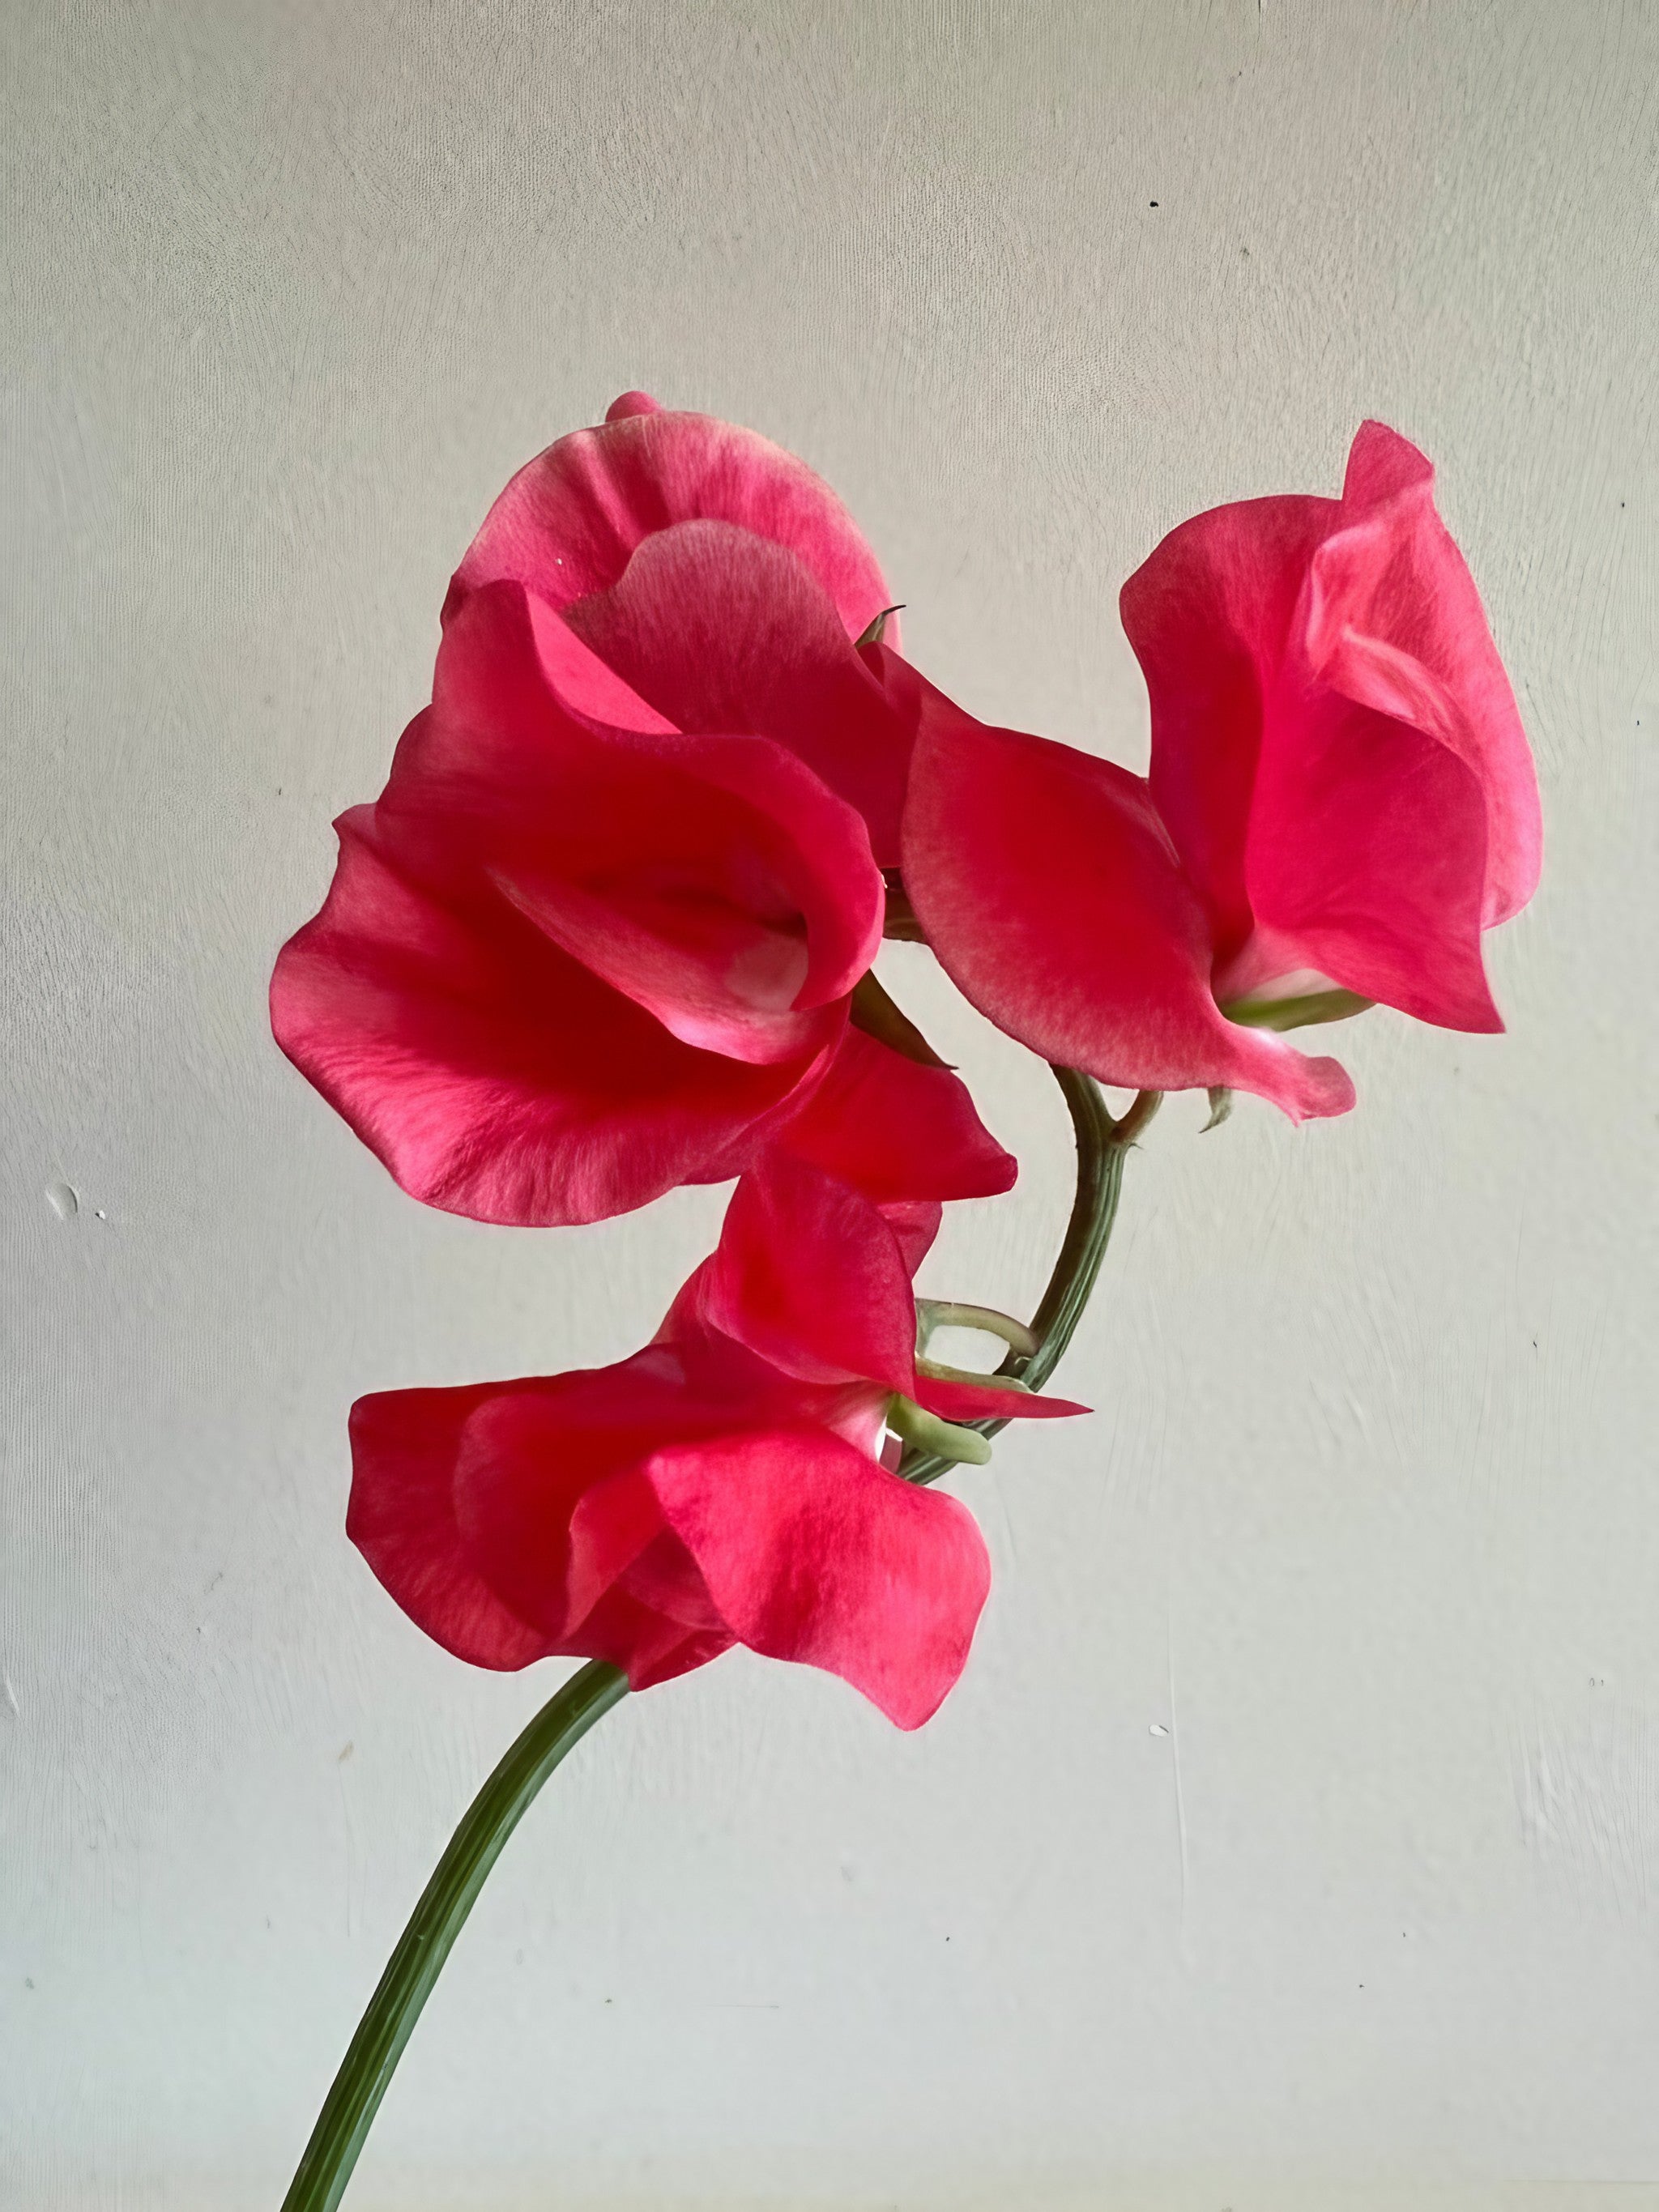 Sweet Pea Mammoth Rose Pink flowers arranged in a vase on a tabletop